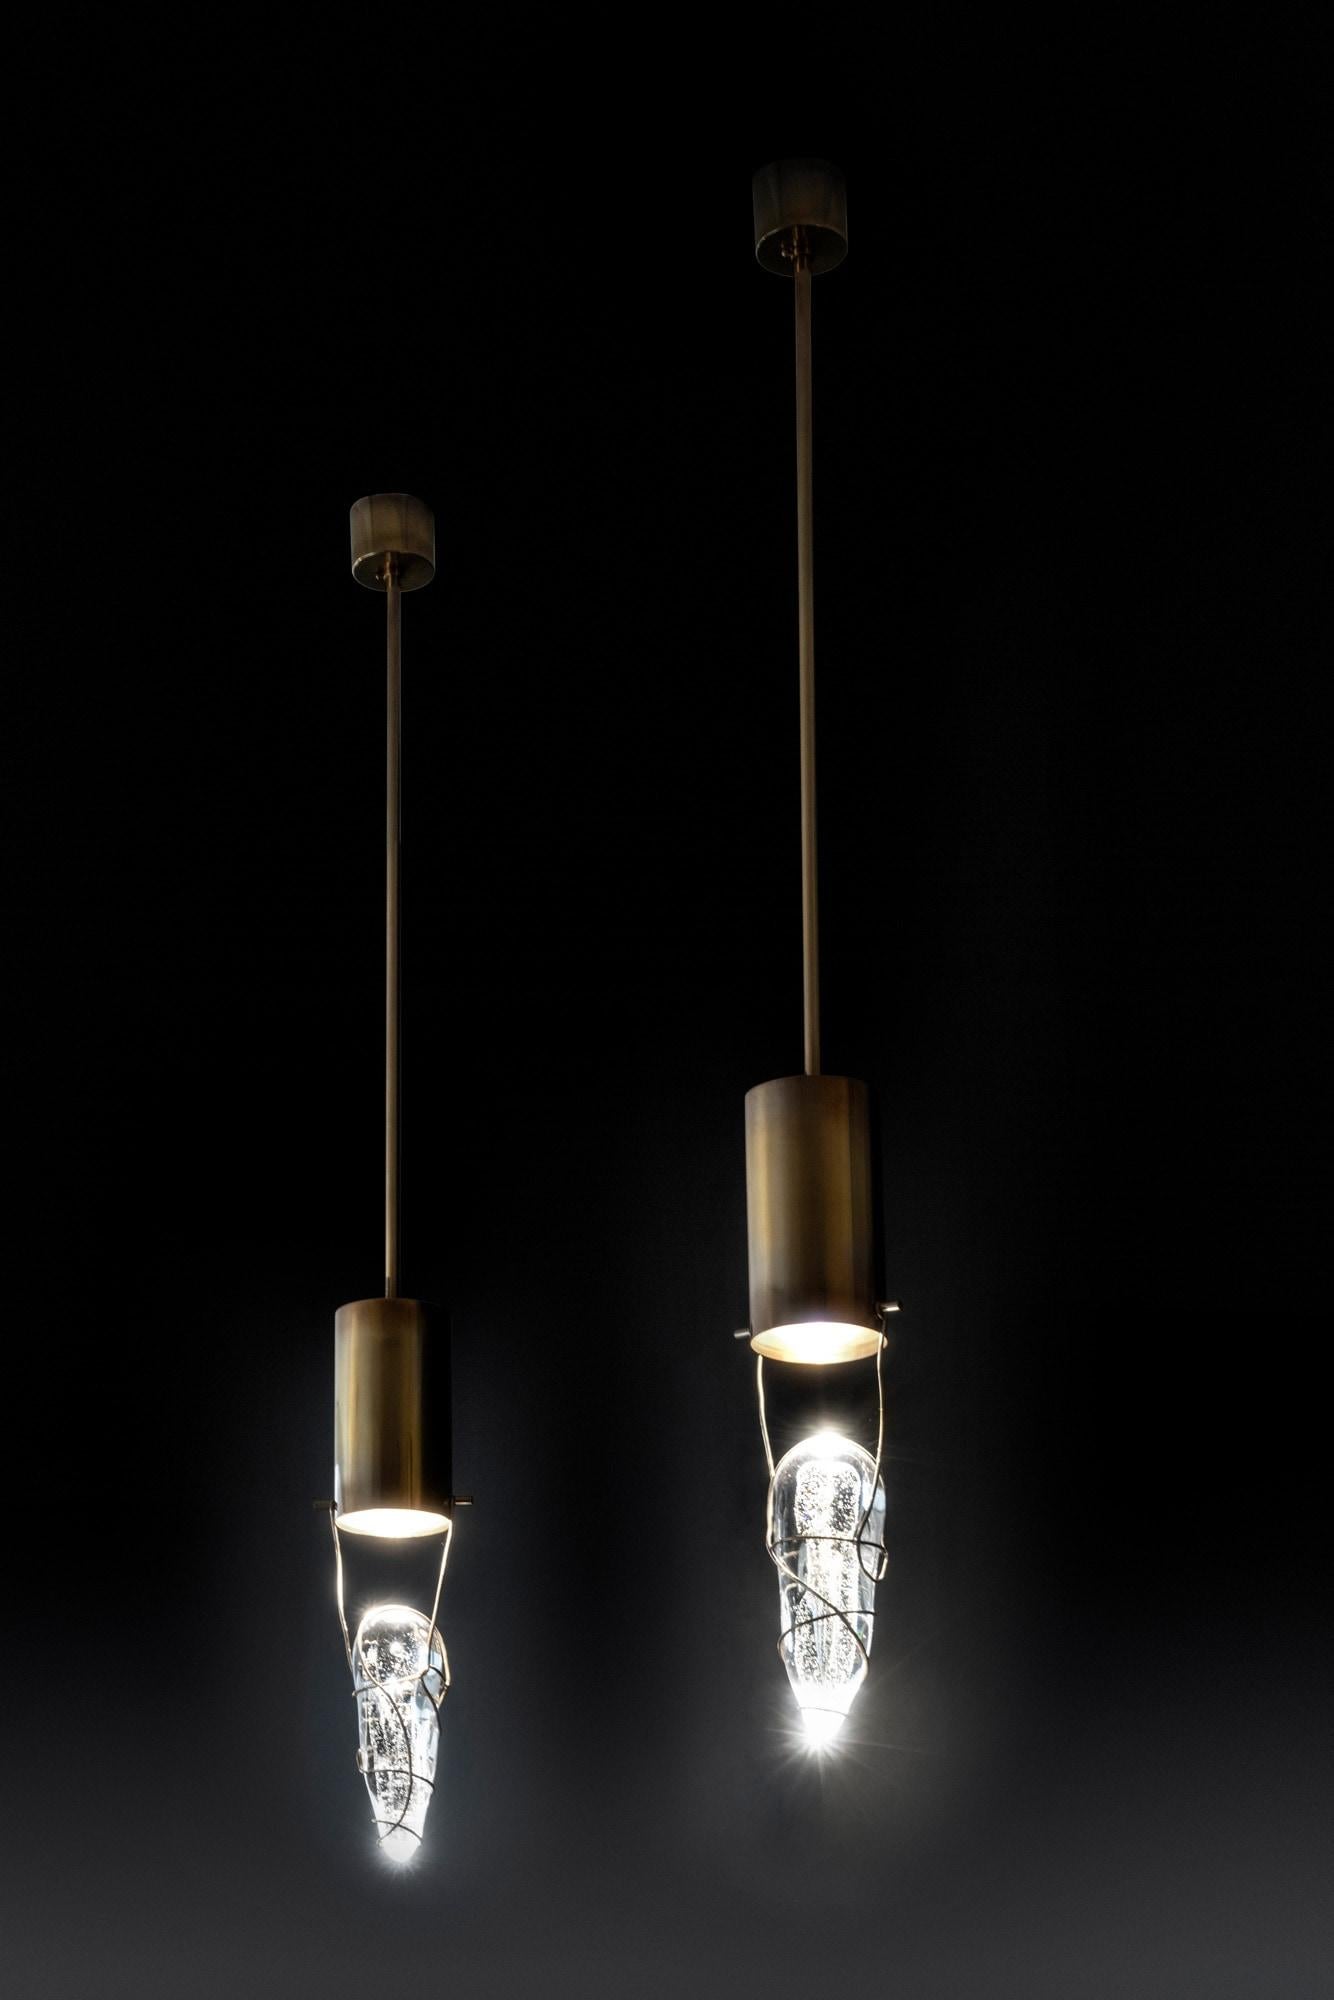 Suspension in slightly burnished brass. The handmade detail, almost suspended, screens and diffuses the light that comes from the light source inside the brass cylinder.